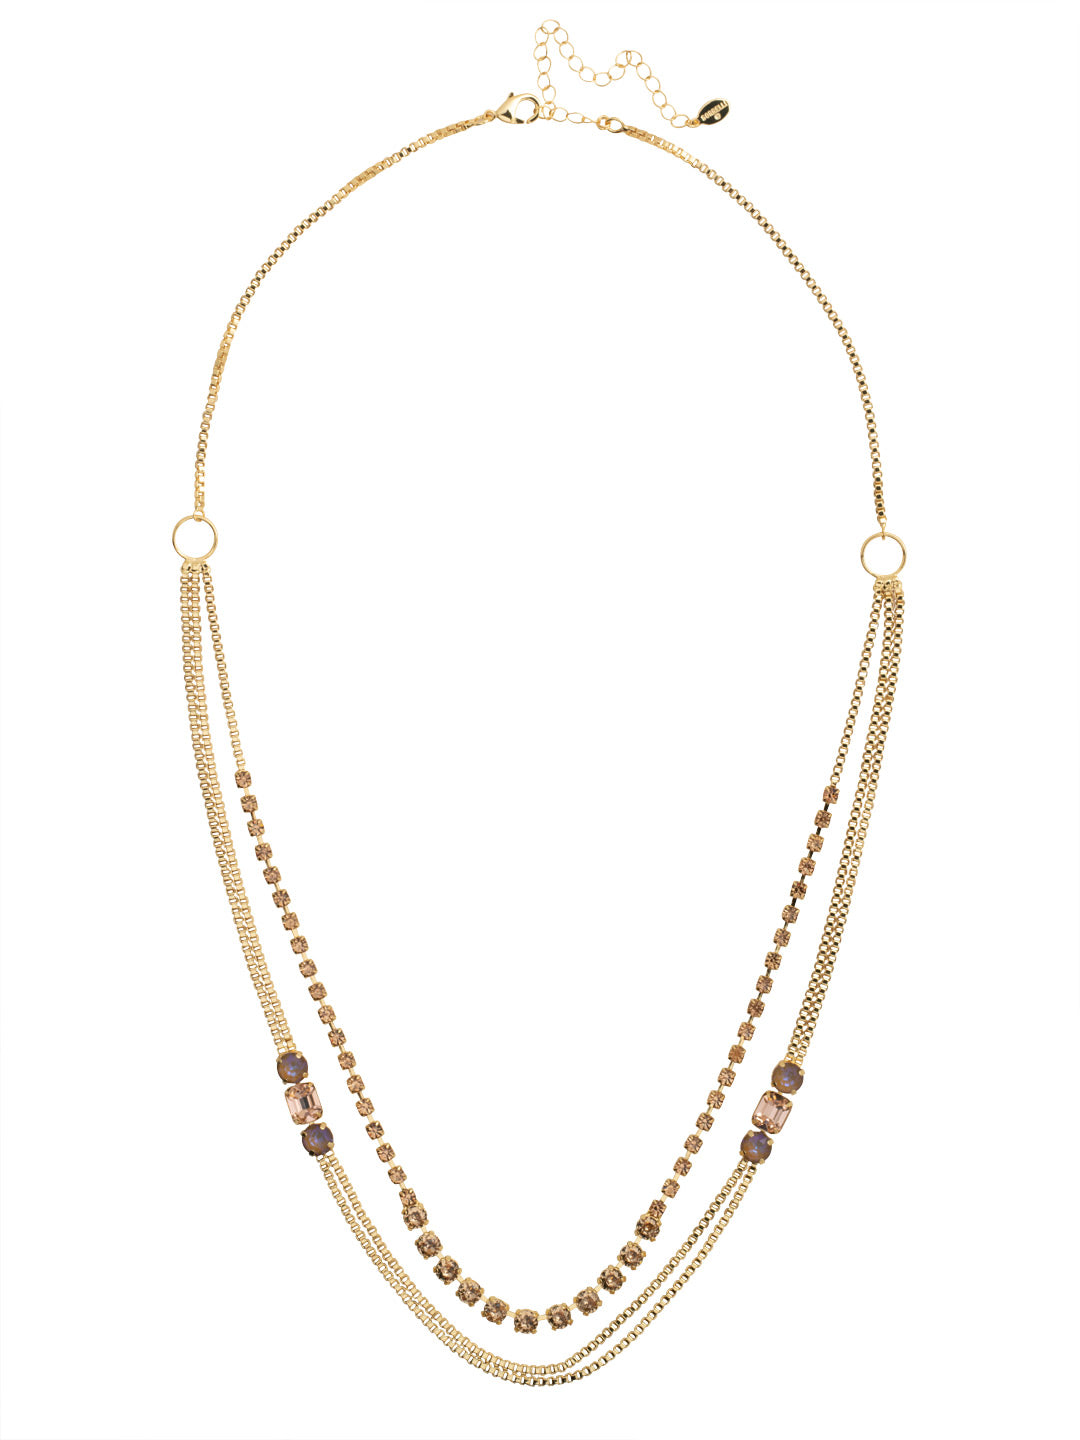 Miriam Layered Long Necklace - NFC4BGRSU - <p>Adjustable and secured with a lobster claw clasp, the Miriam Layered Long Necklace features box chains and crystals to create an effortless layered look. From Sorrelli's Raw Sugar collection in our Bright Gold-tone finish.</p>